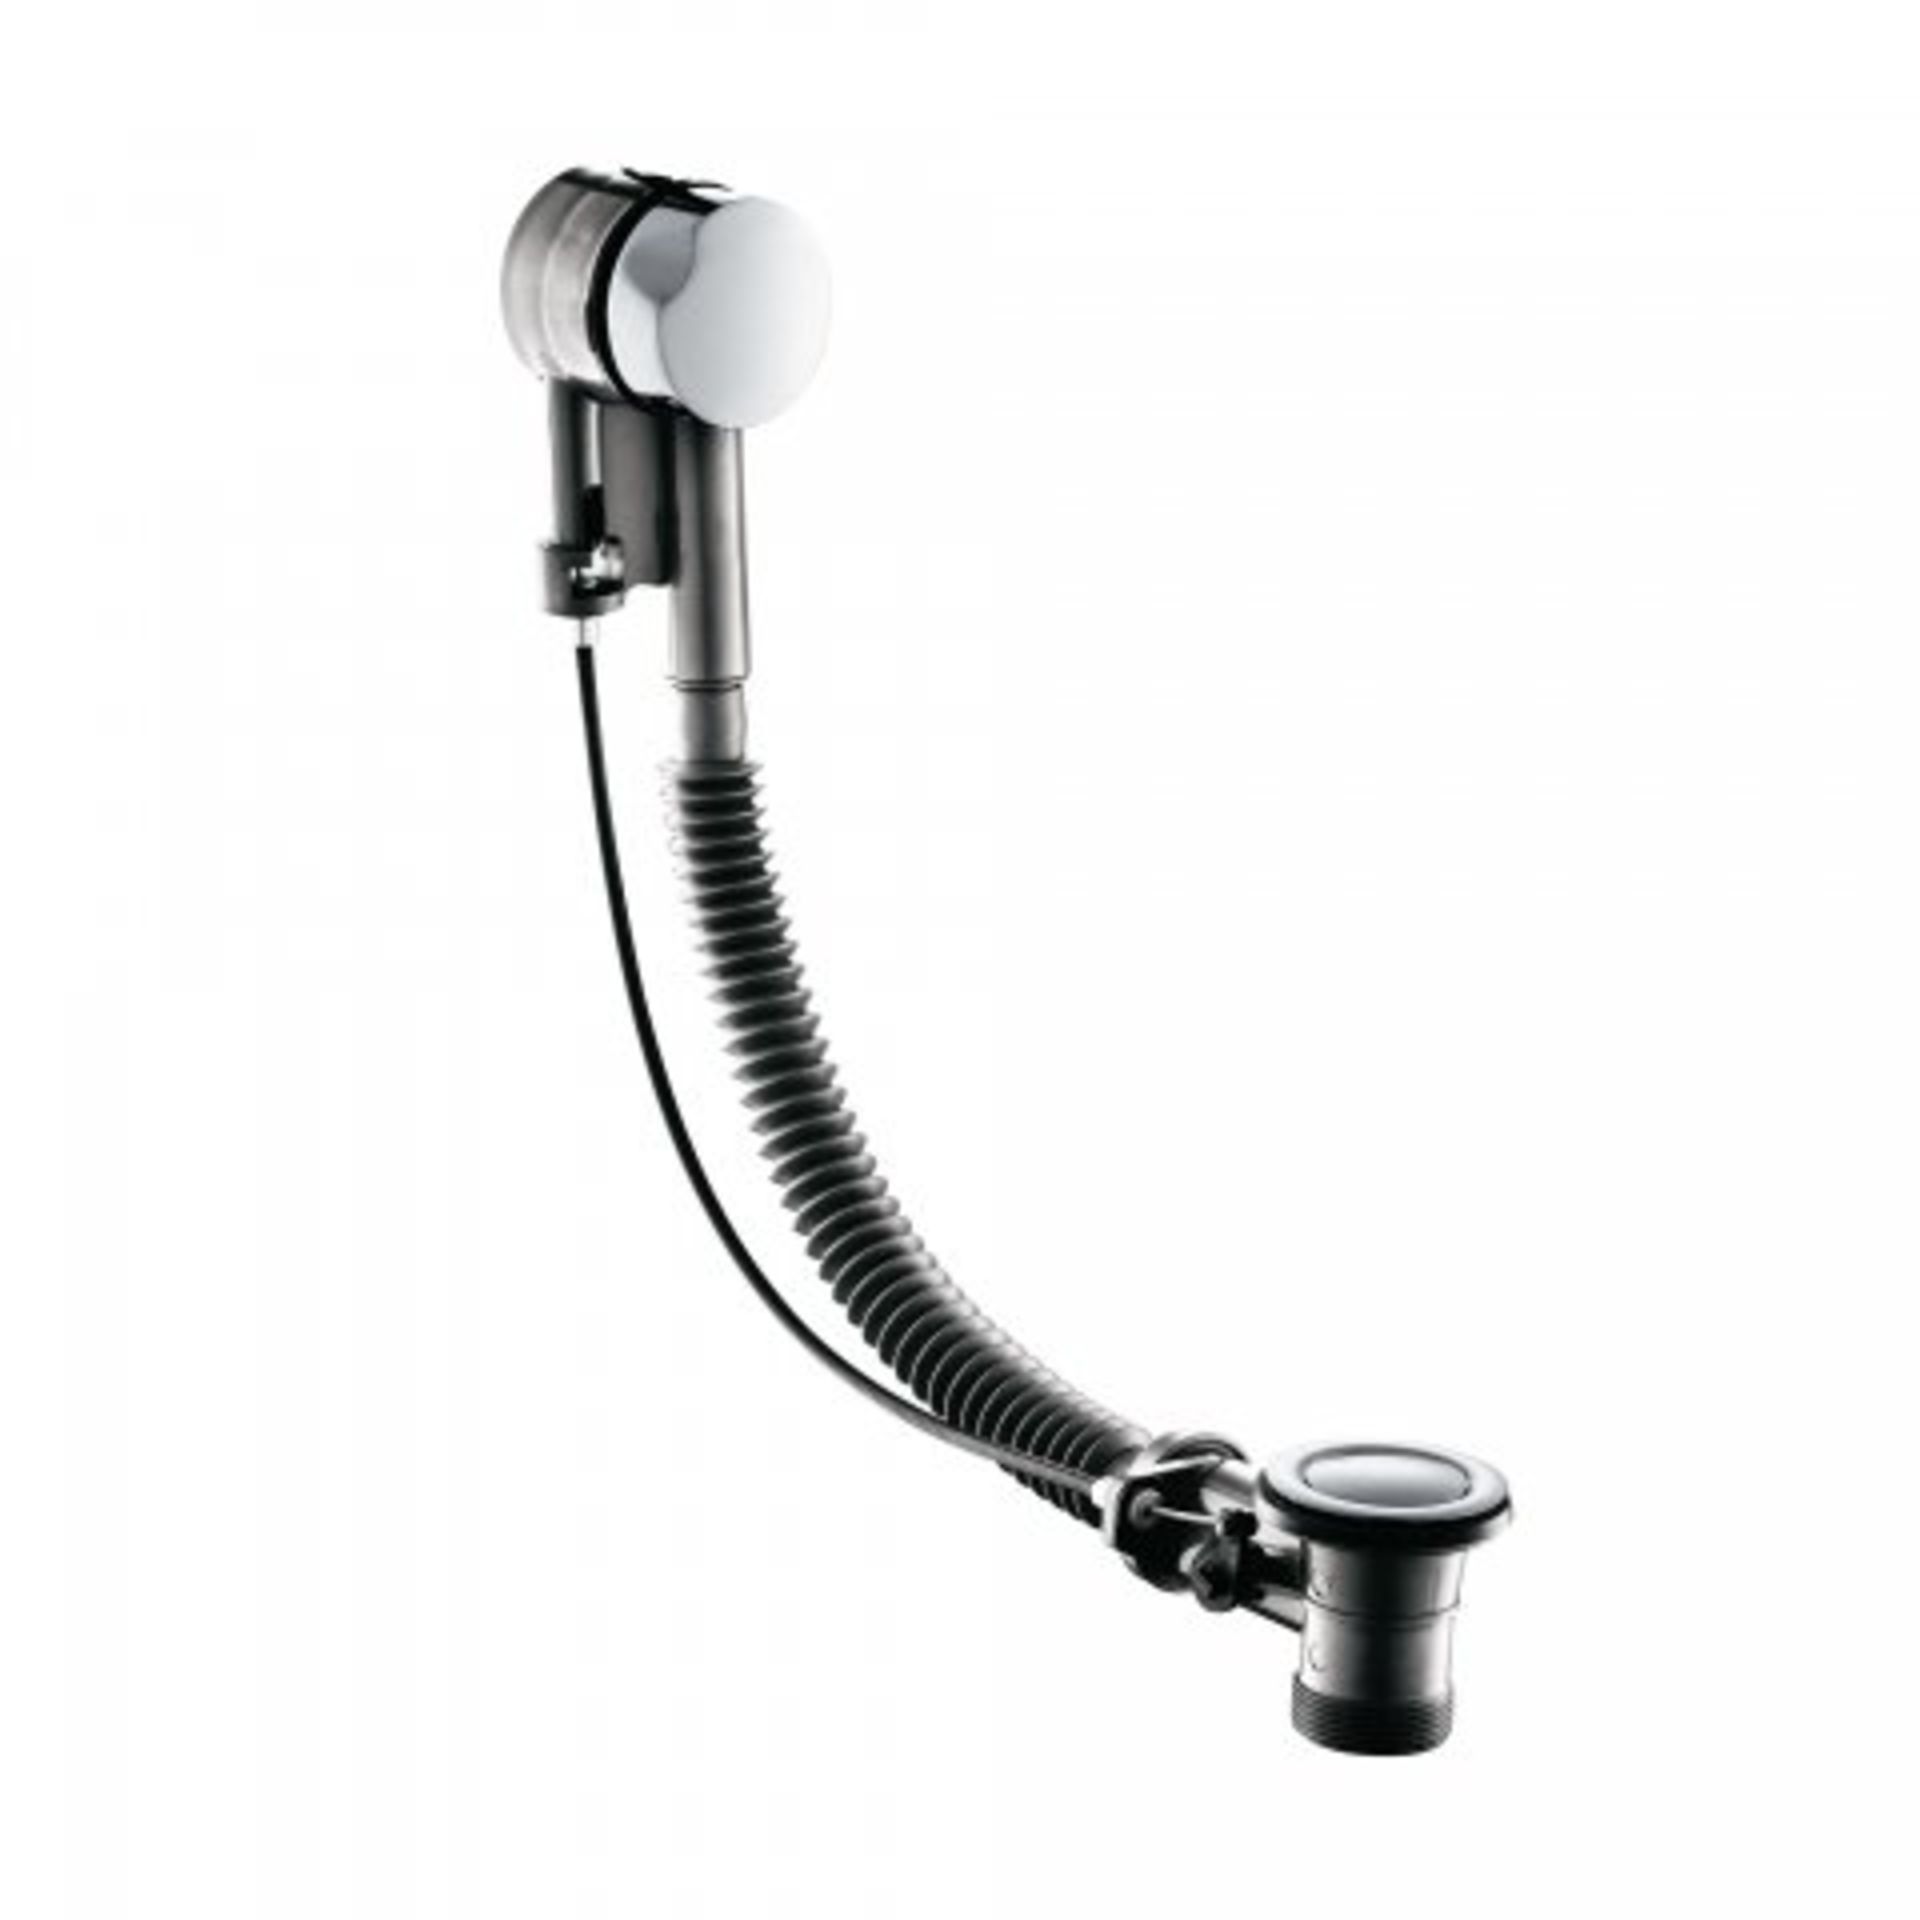 (A552) Bath Pop Up Waste - Overflow This bath pop-up waste overflow features a durable flex pipe and